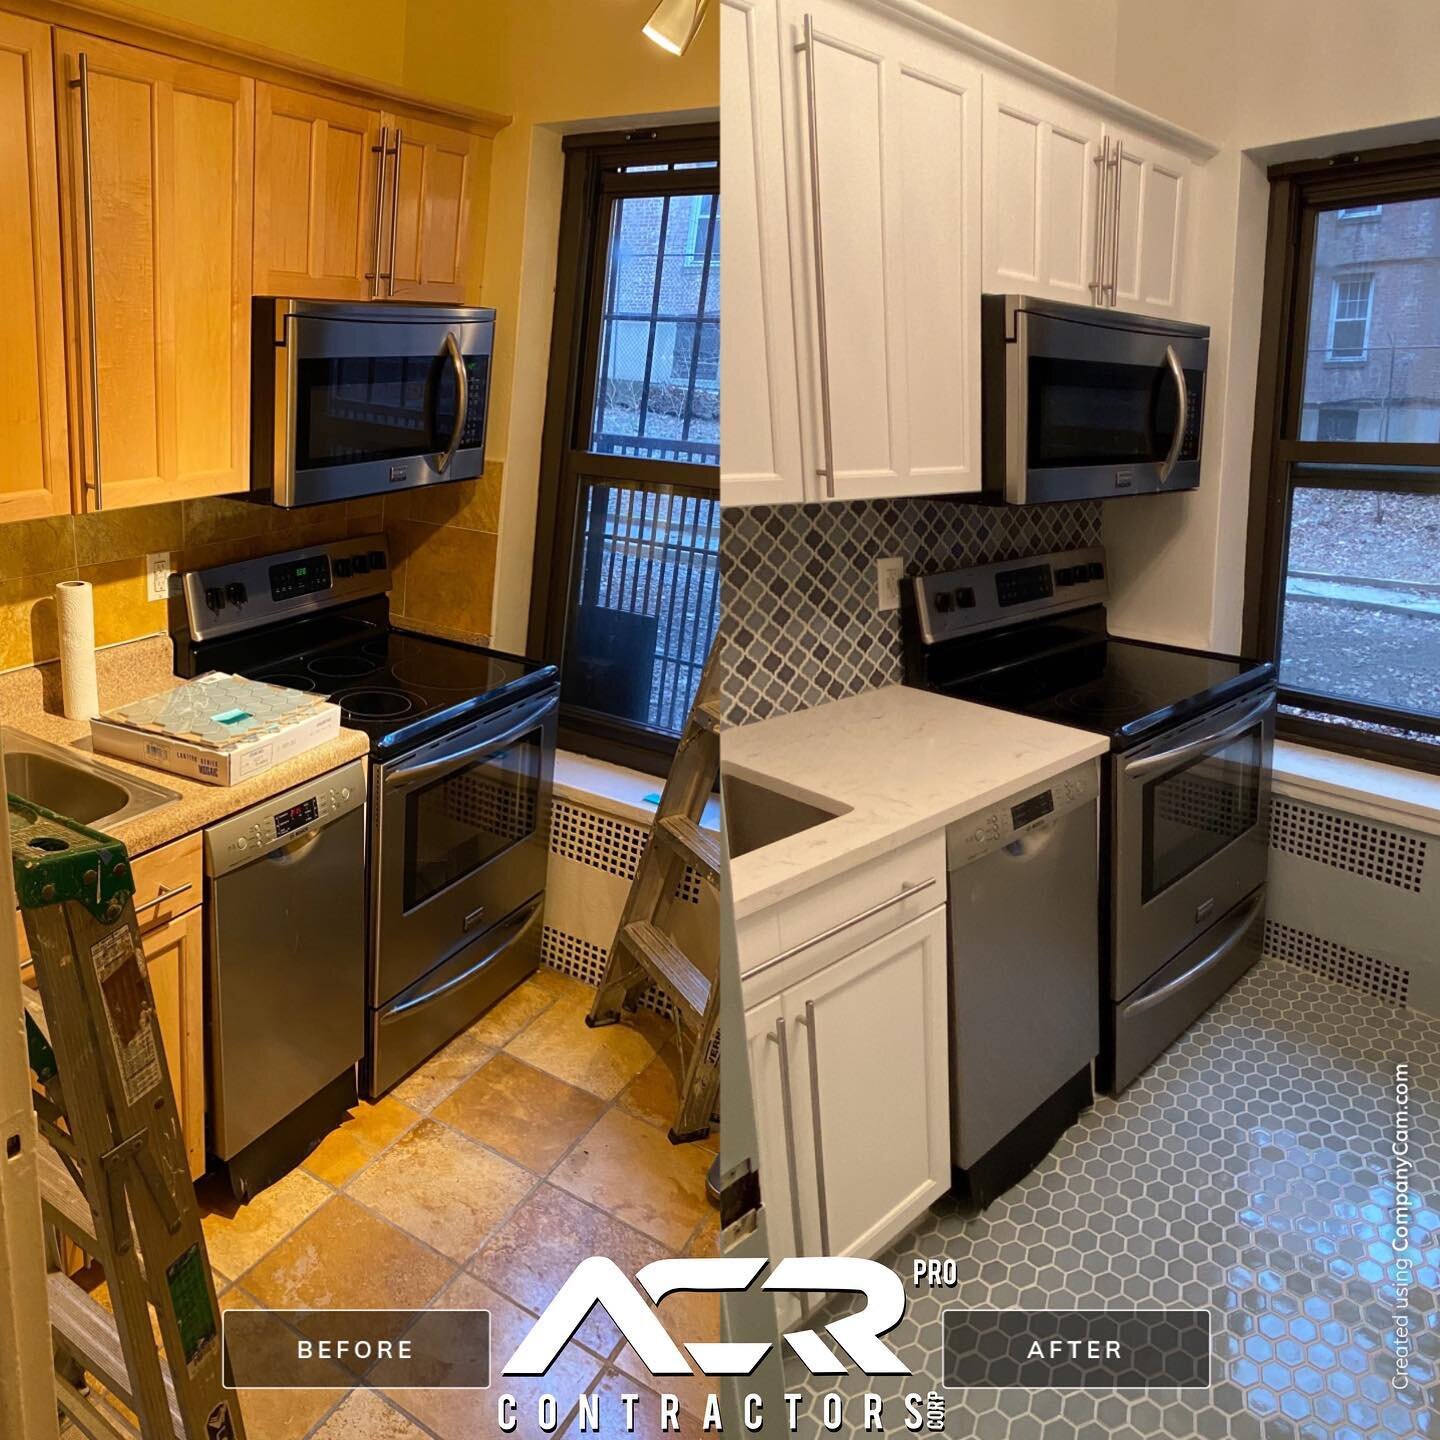 In this Project we painted the cabinetry with Benjamin Moore Advance Paint, new Pental quartz countertop, new backsplash, floor tiles, wall repairs and wall paint. 

#brooklyncontractor #nyccontractor #parkslope #prospectheights #carrollgardens #cobb